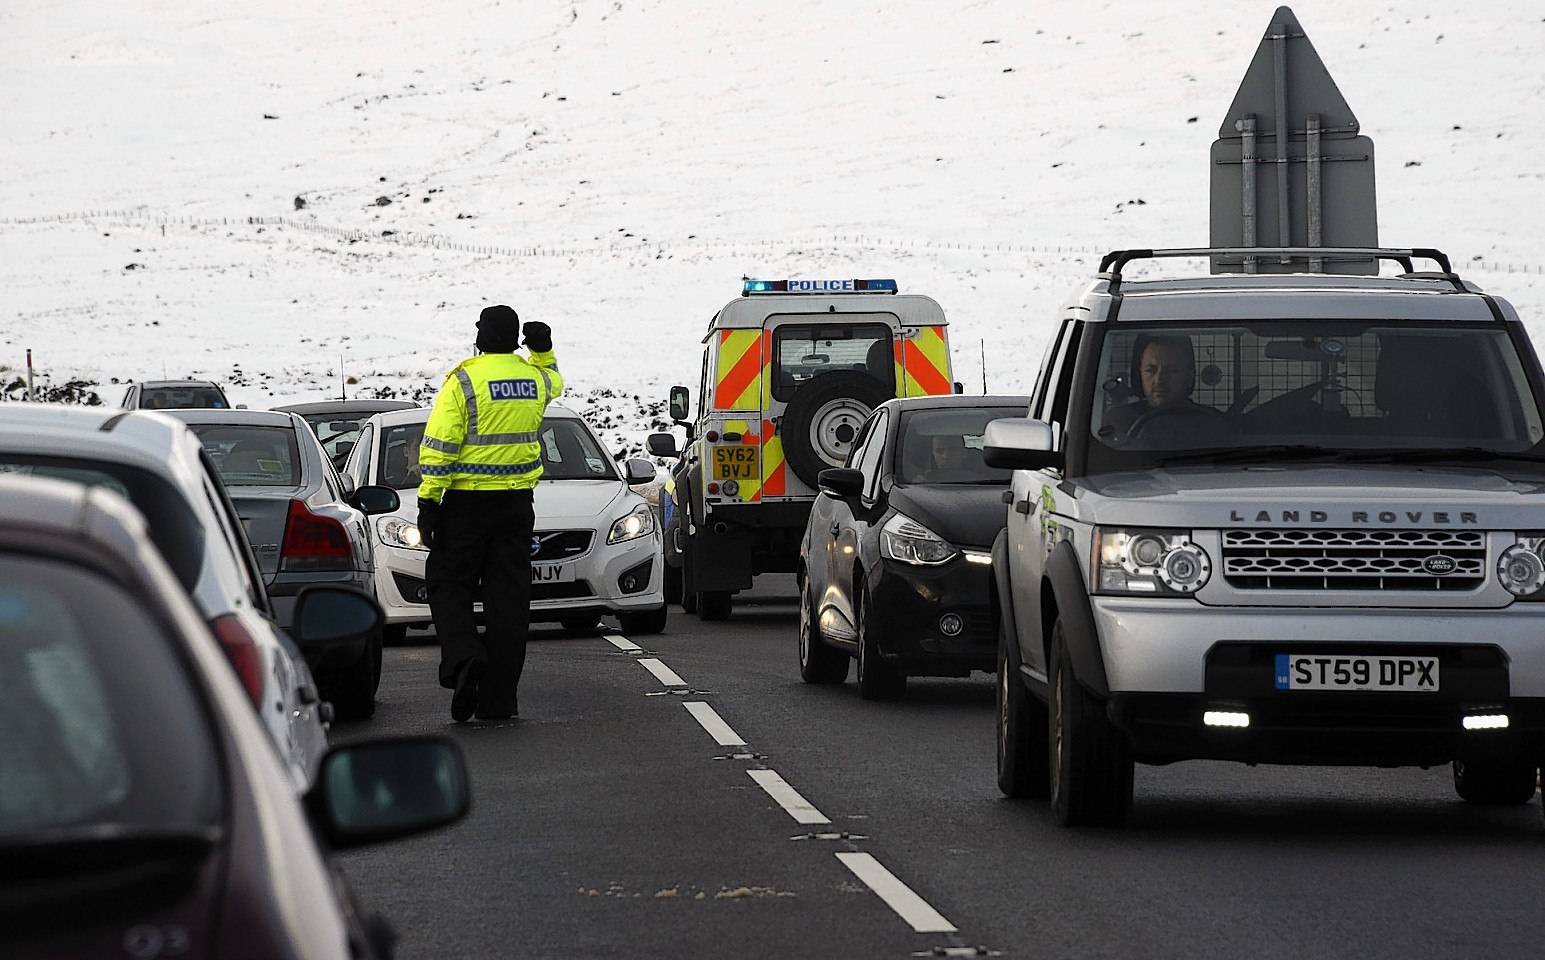 Cars line the busy A82 at Glencoe Mountain Resort yesterday